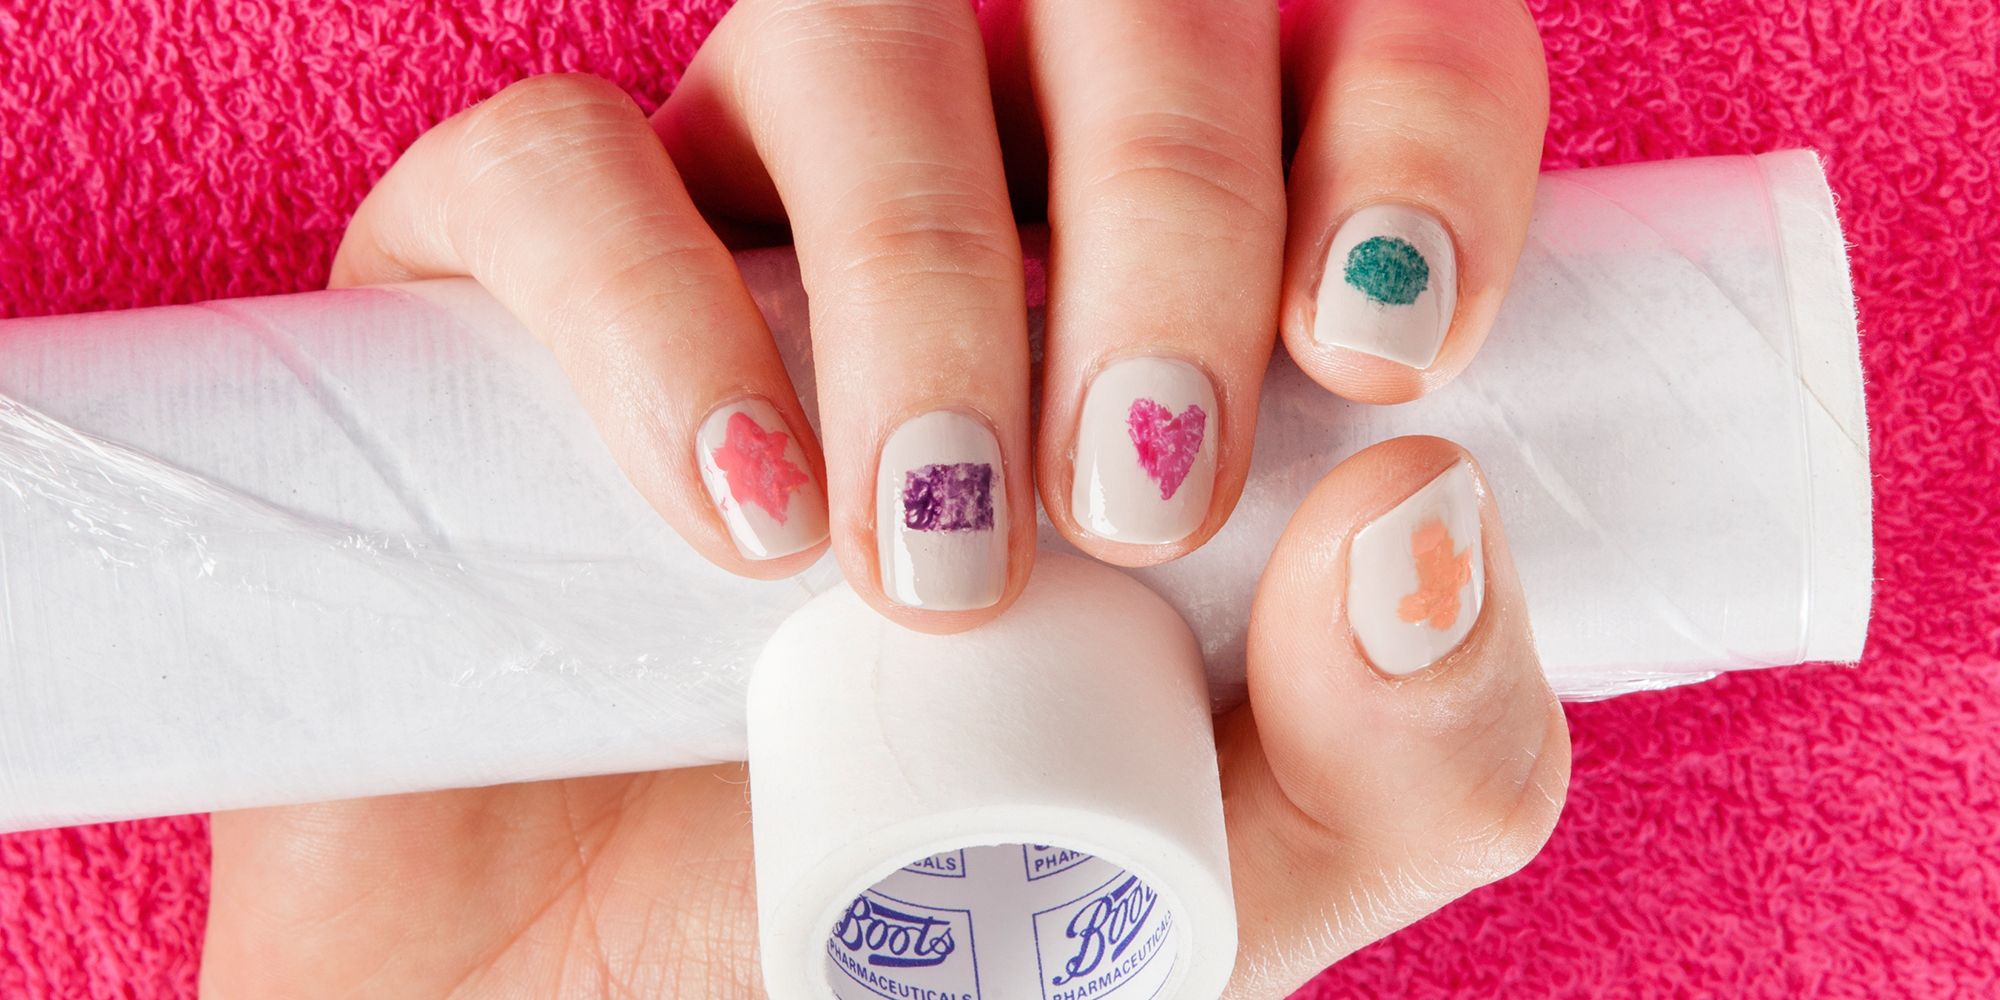 DIY nail art: How to do shapes using scotch tape and cling film